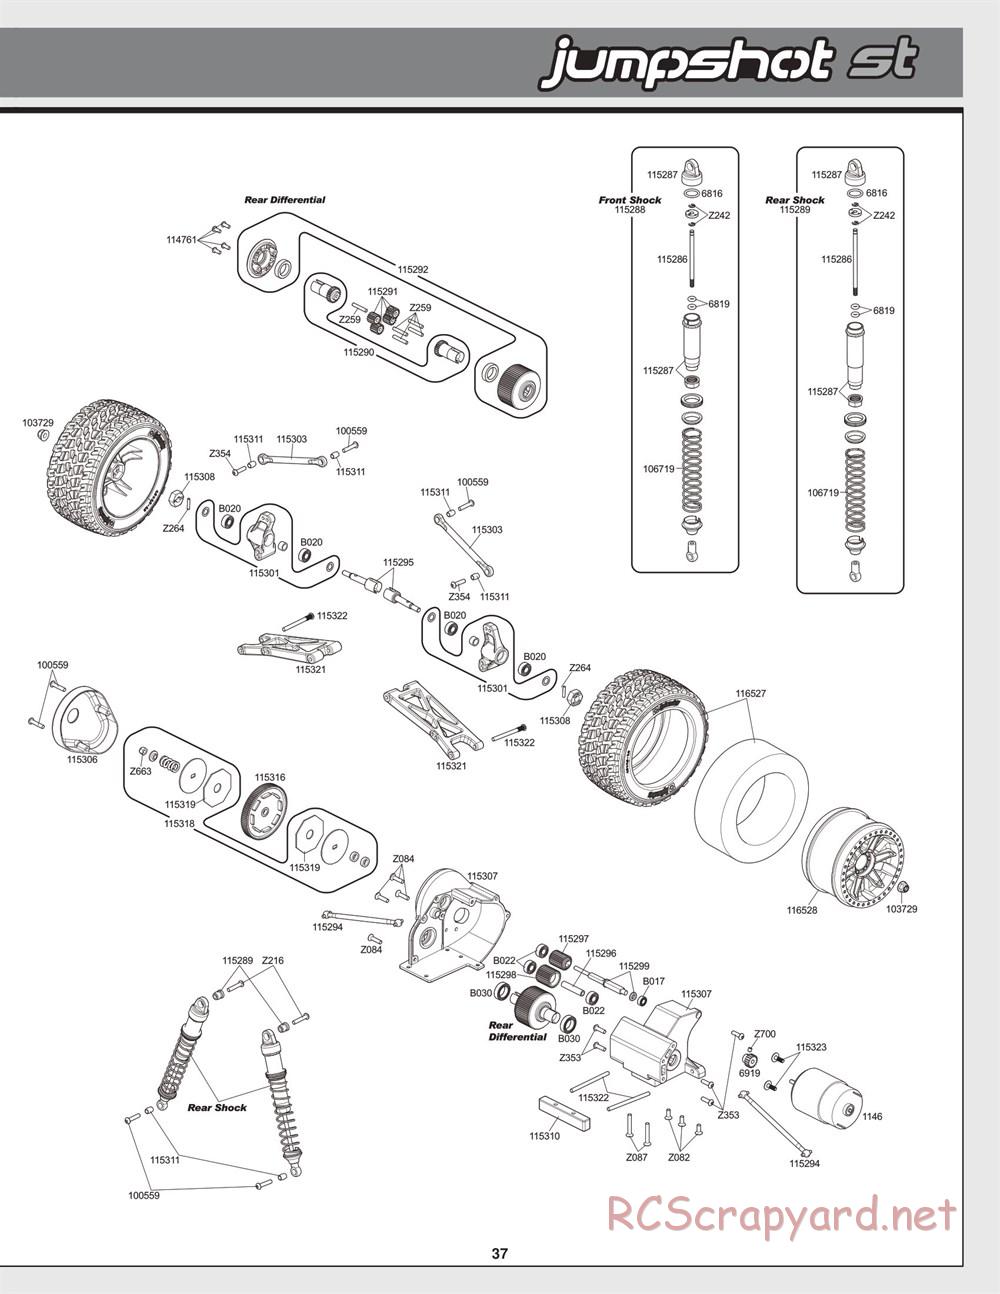 HPI - Jumpshot ST - Exploded View - Page 37